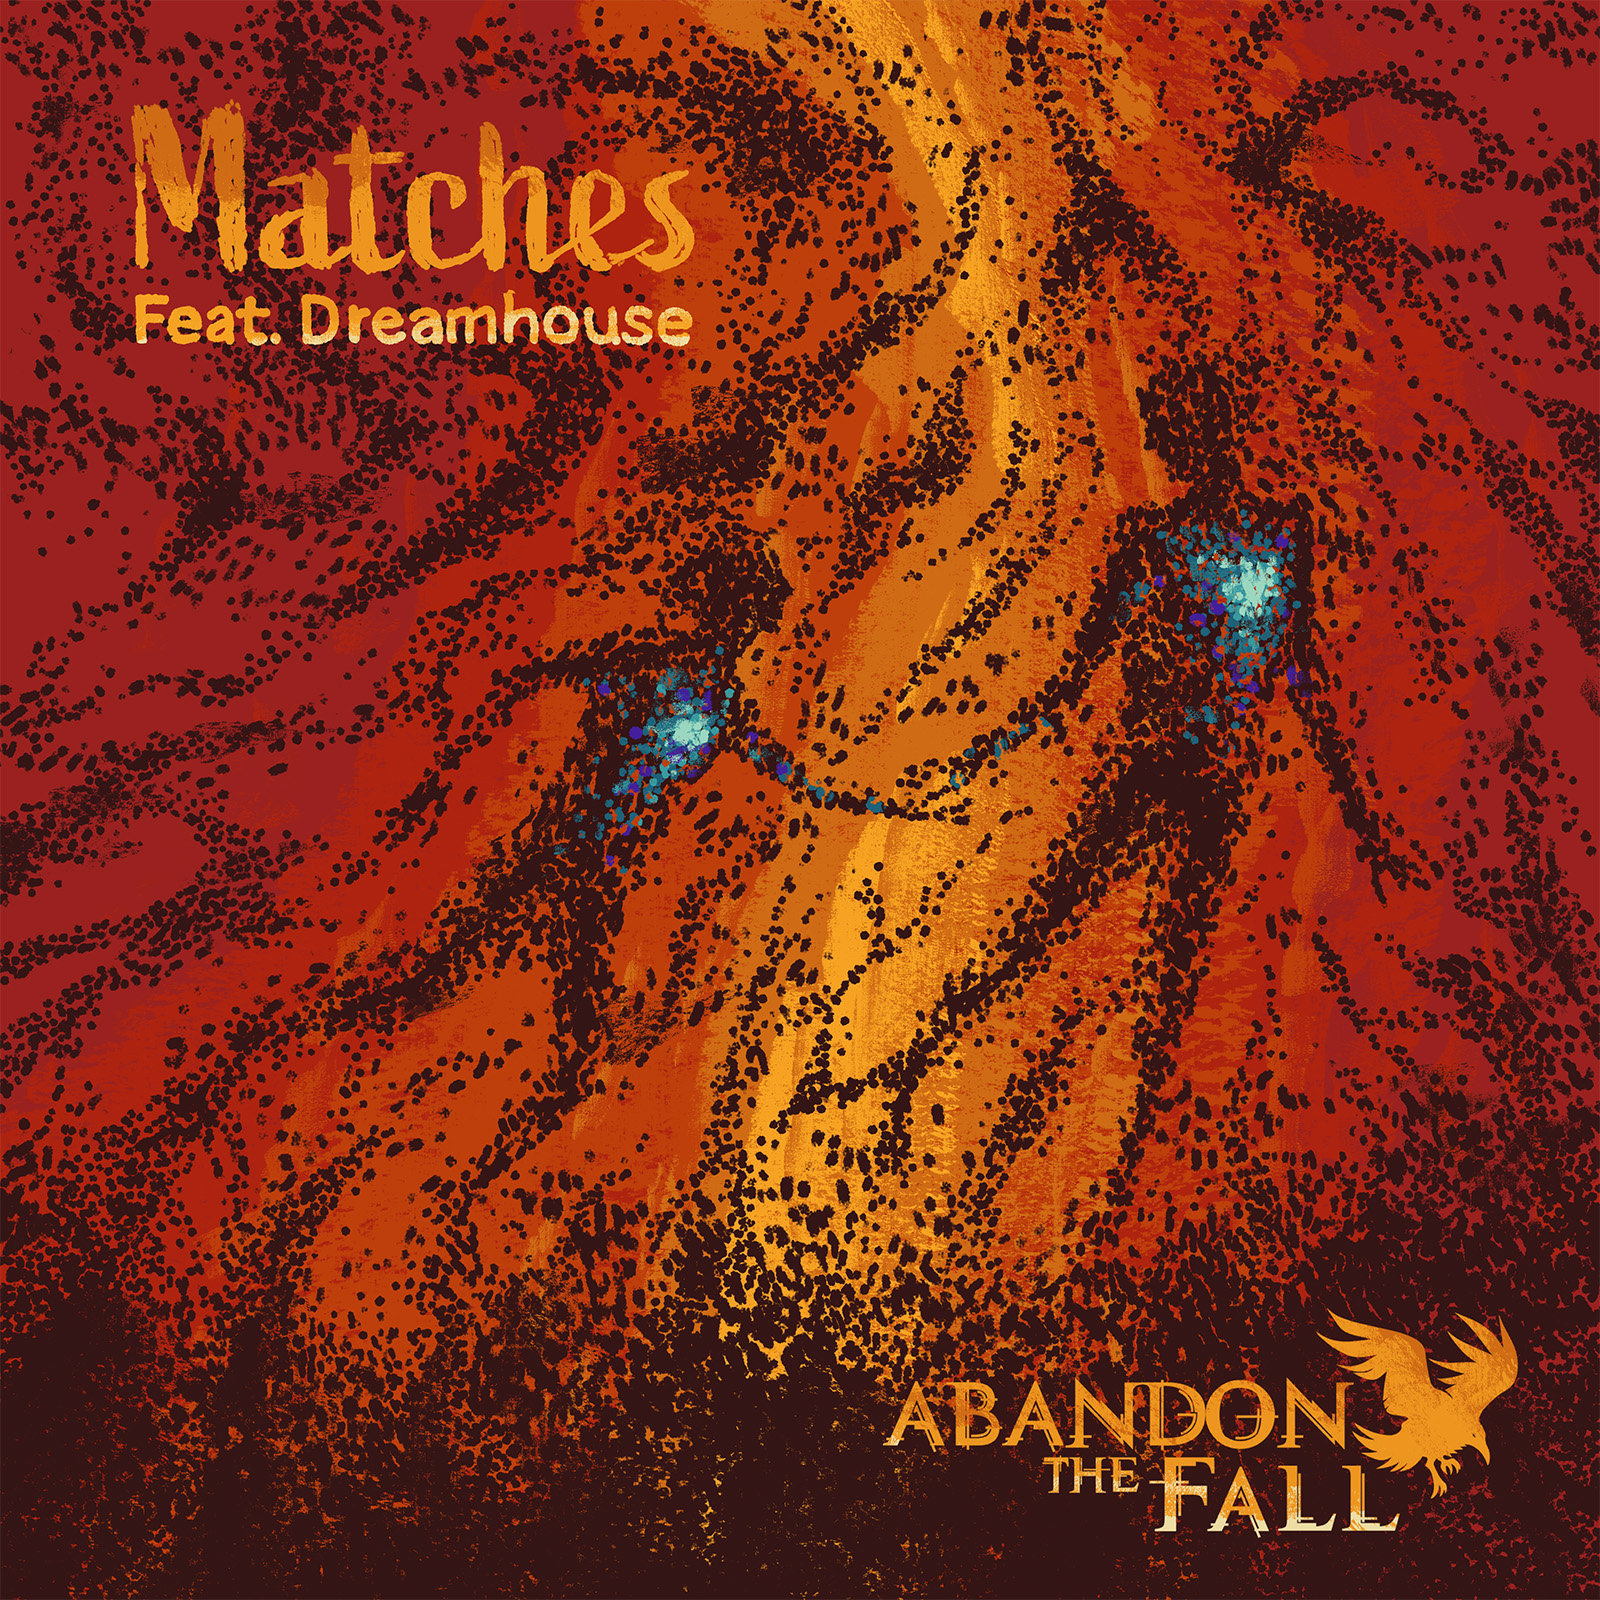 "Matches" by Abandon the Fall